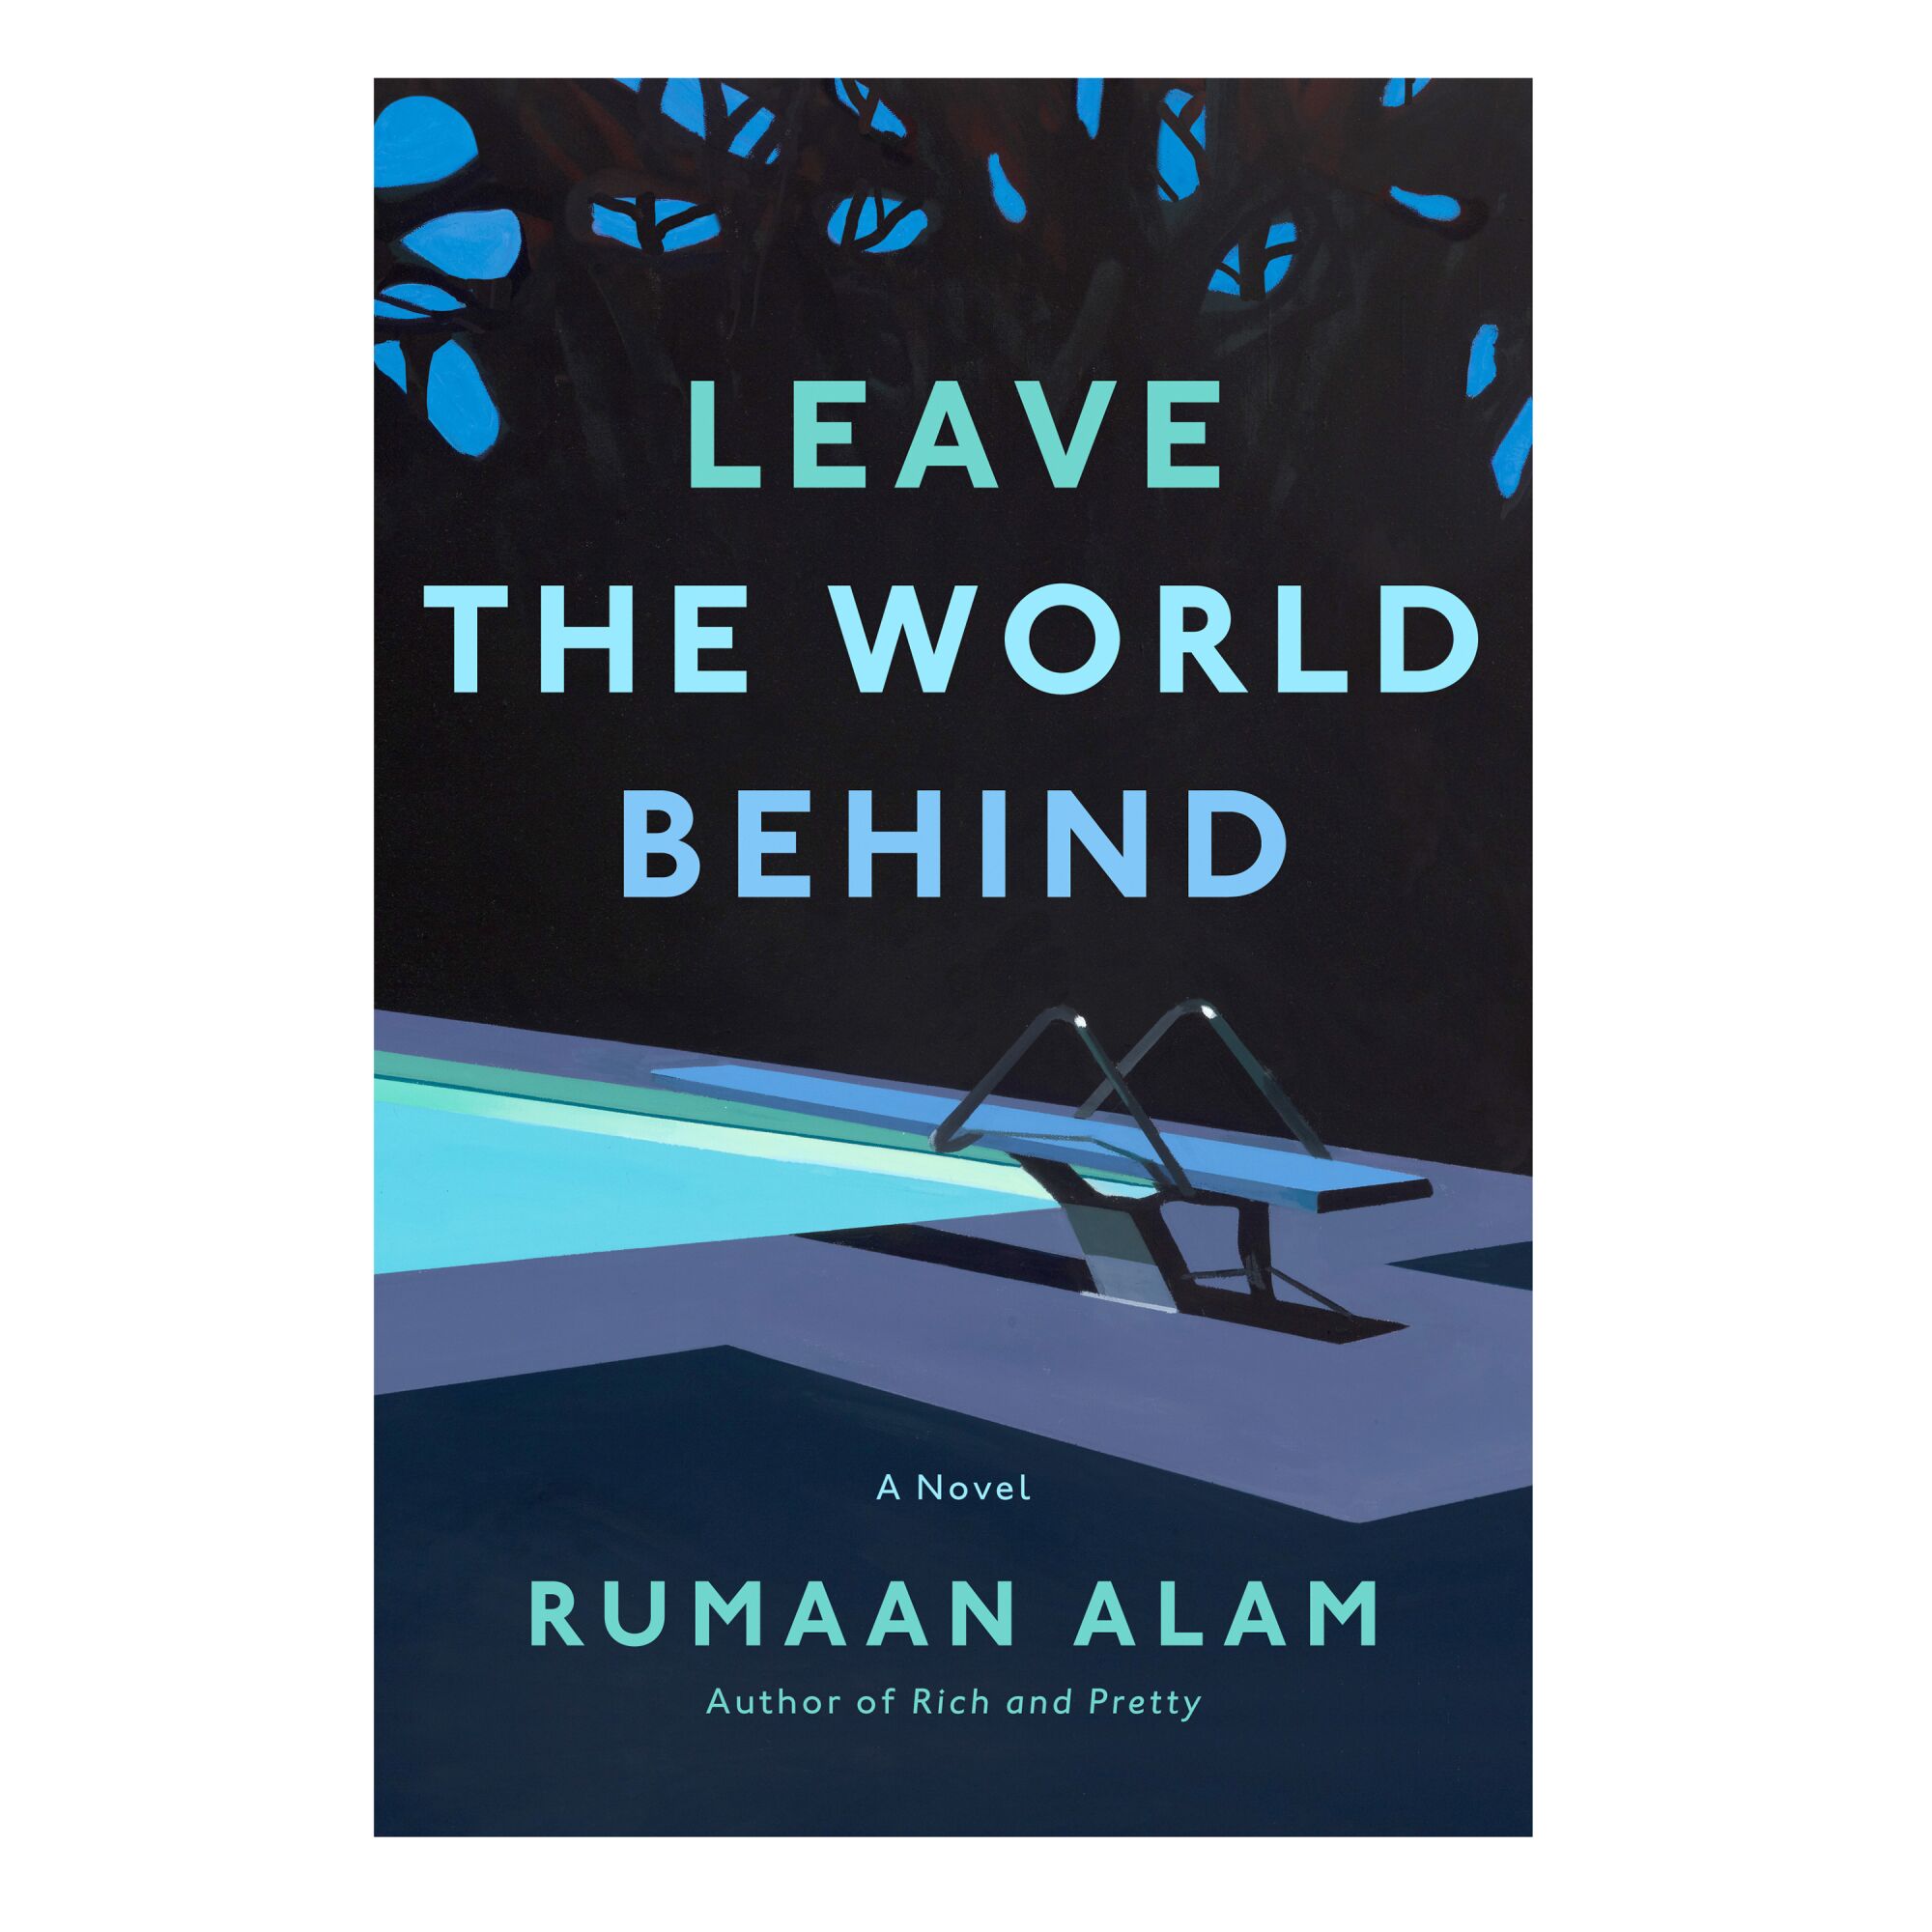 HOLIDAY GIFT GUIDE - Cover of the book Leave The World Behind: A Novel by Rumaan Alam.